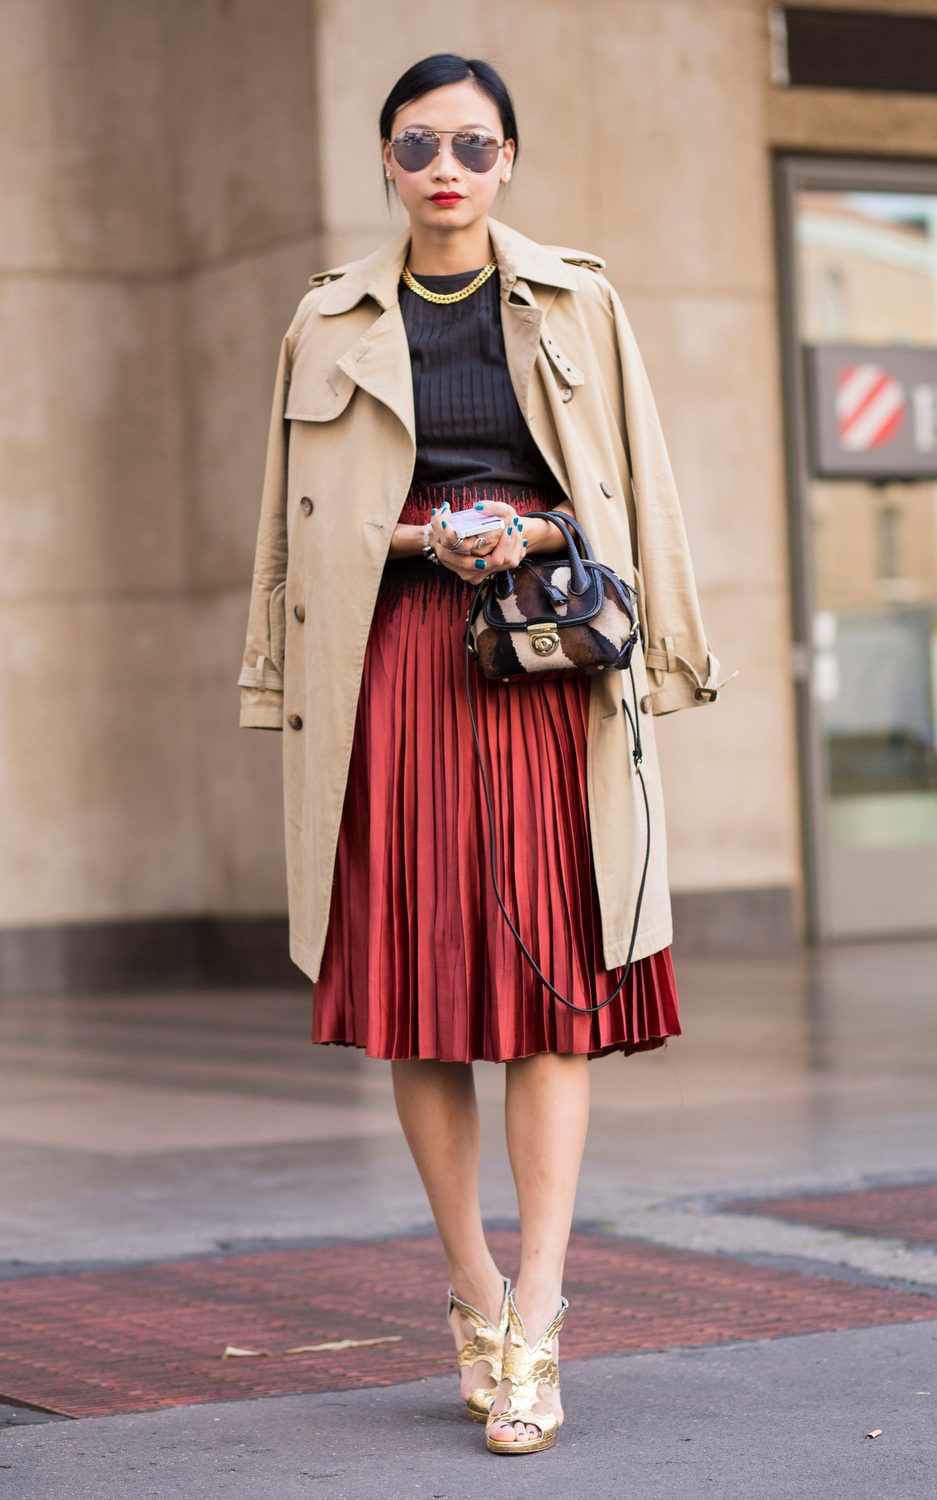 How to wear pleated skirts formally in winter 